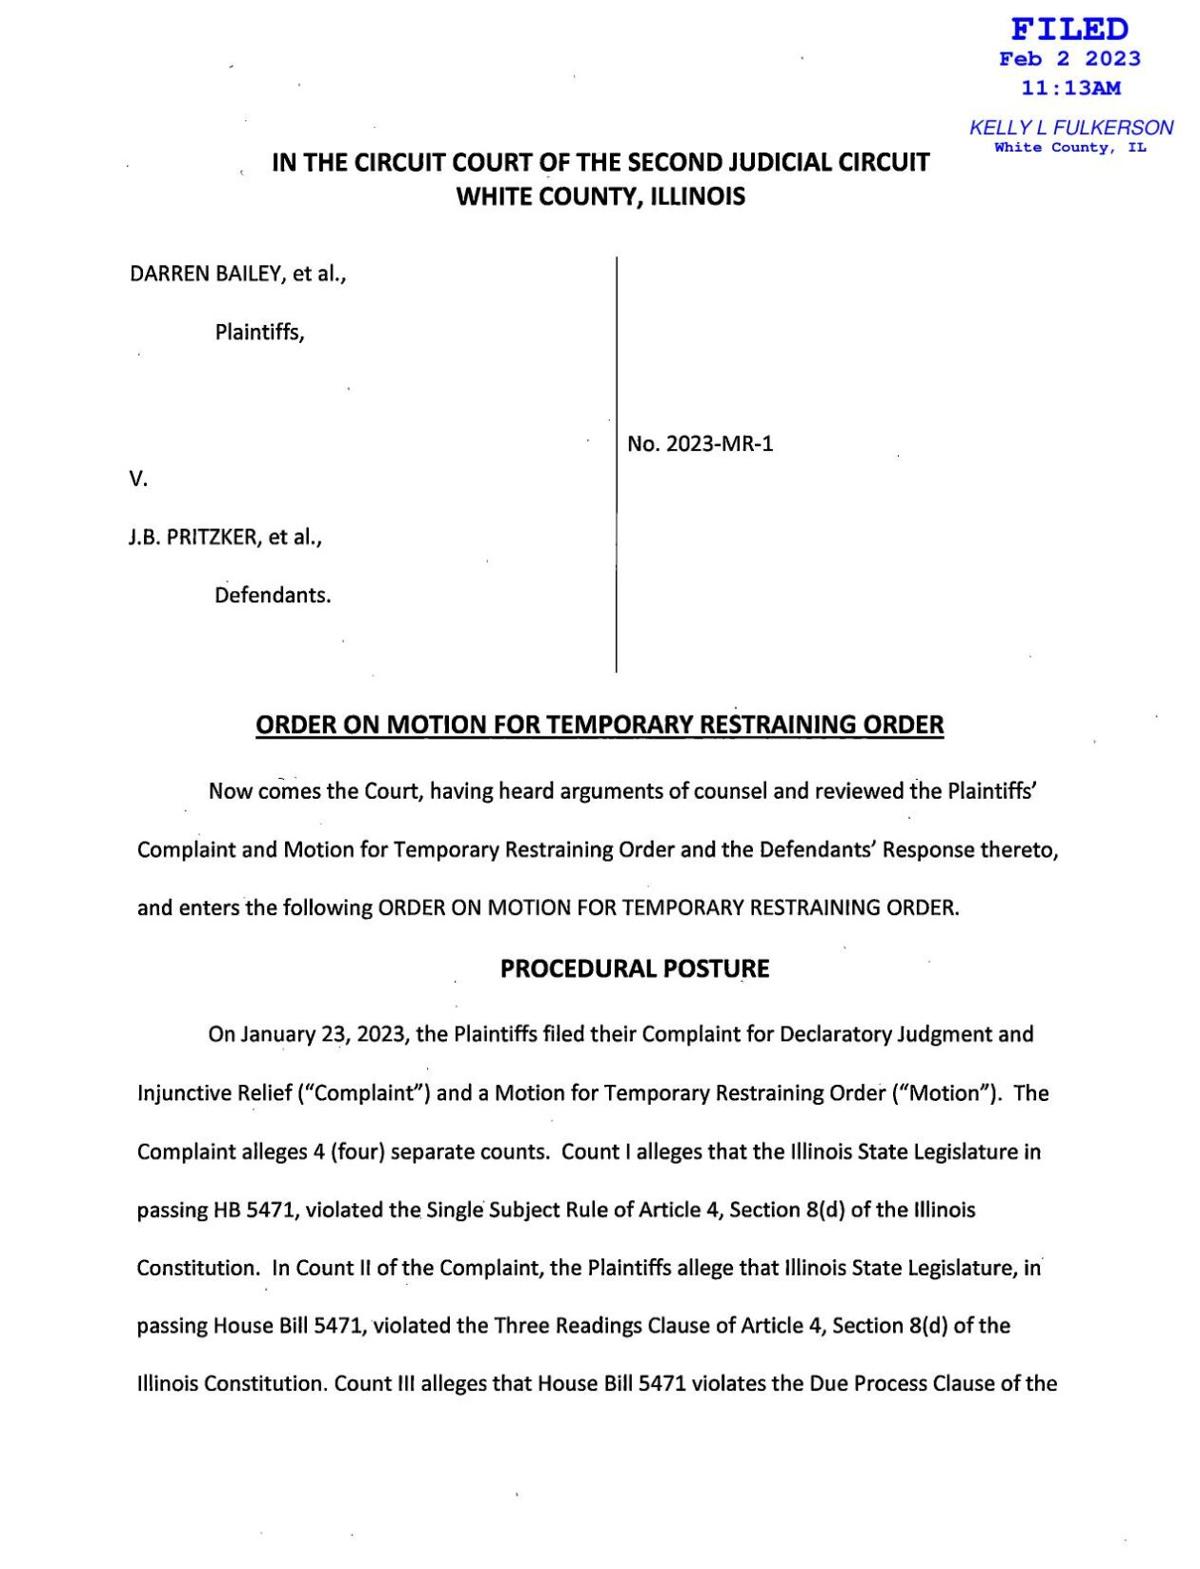 White County temporary restraining order against the Protect Illinois Communities Act.